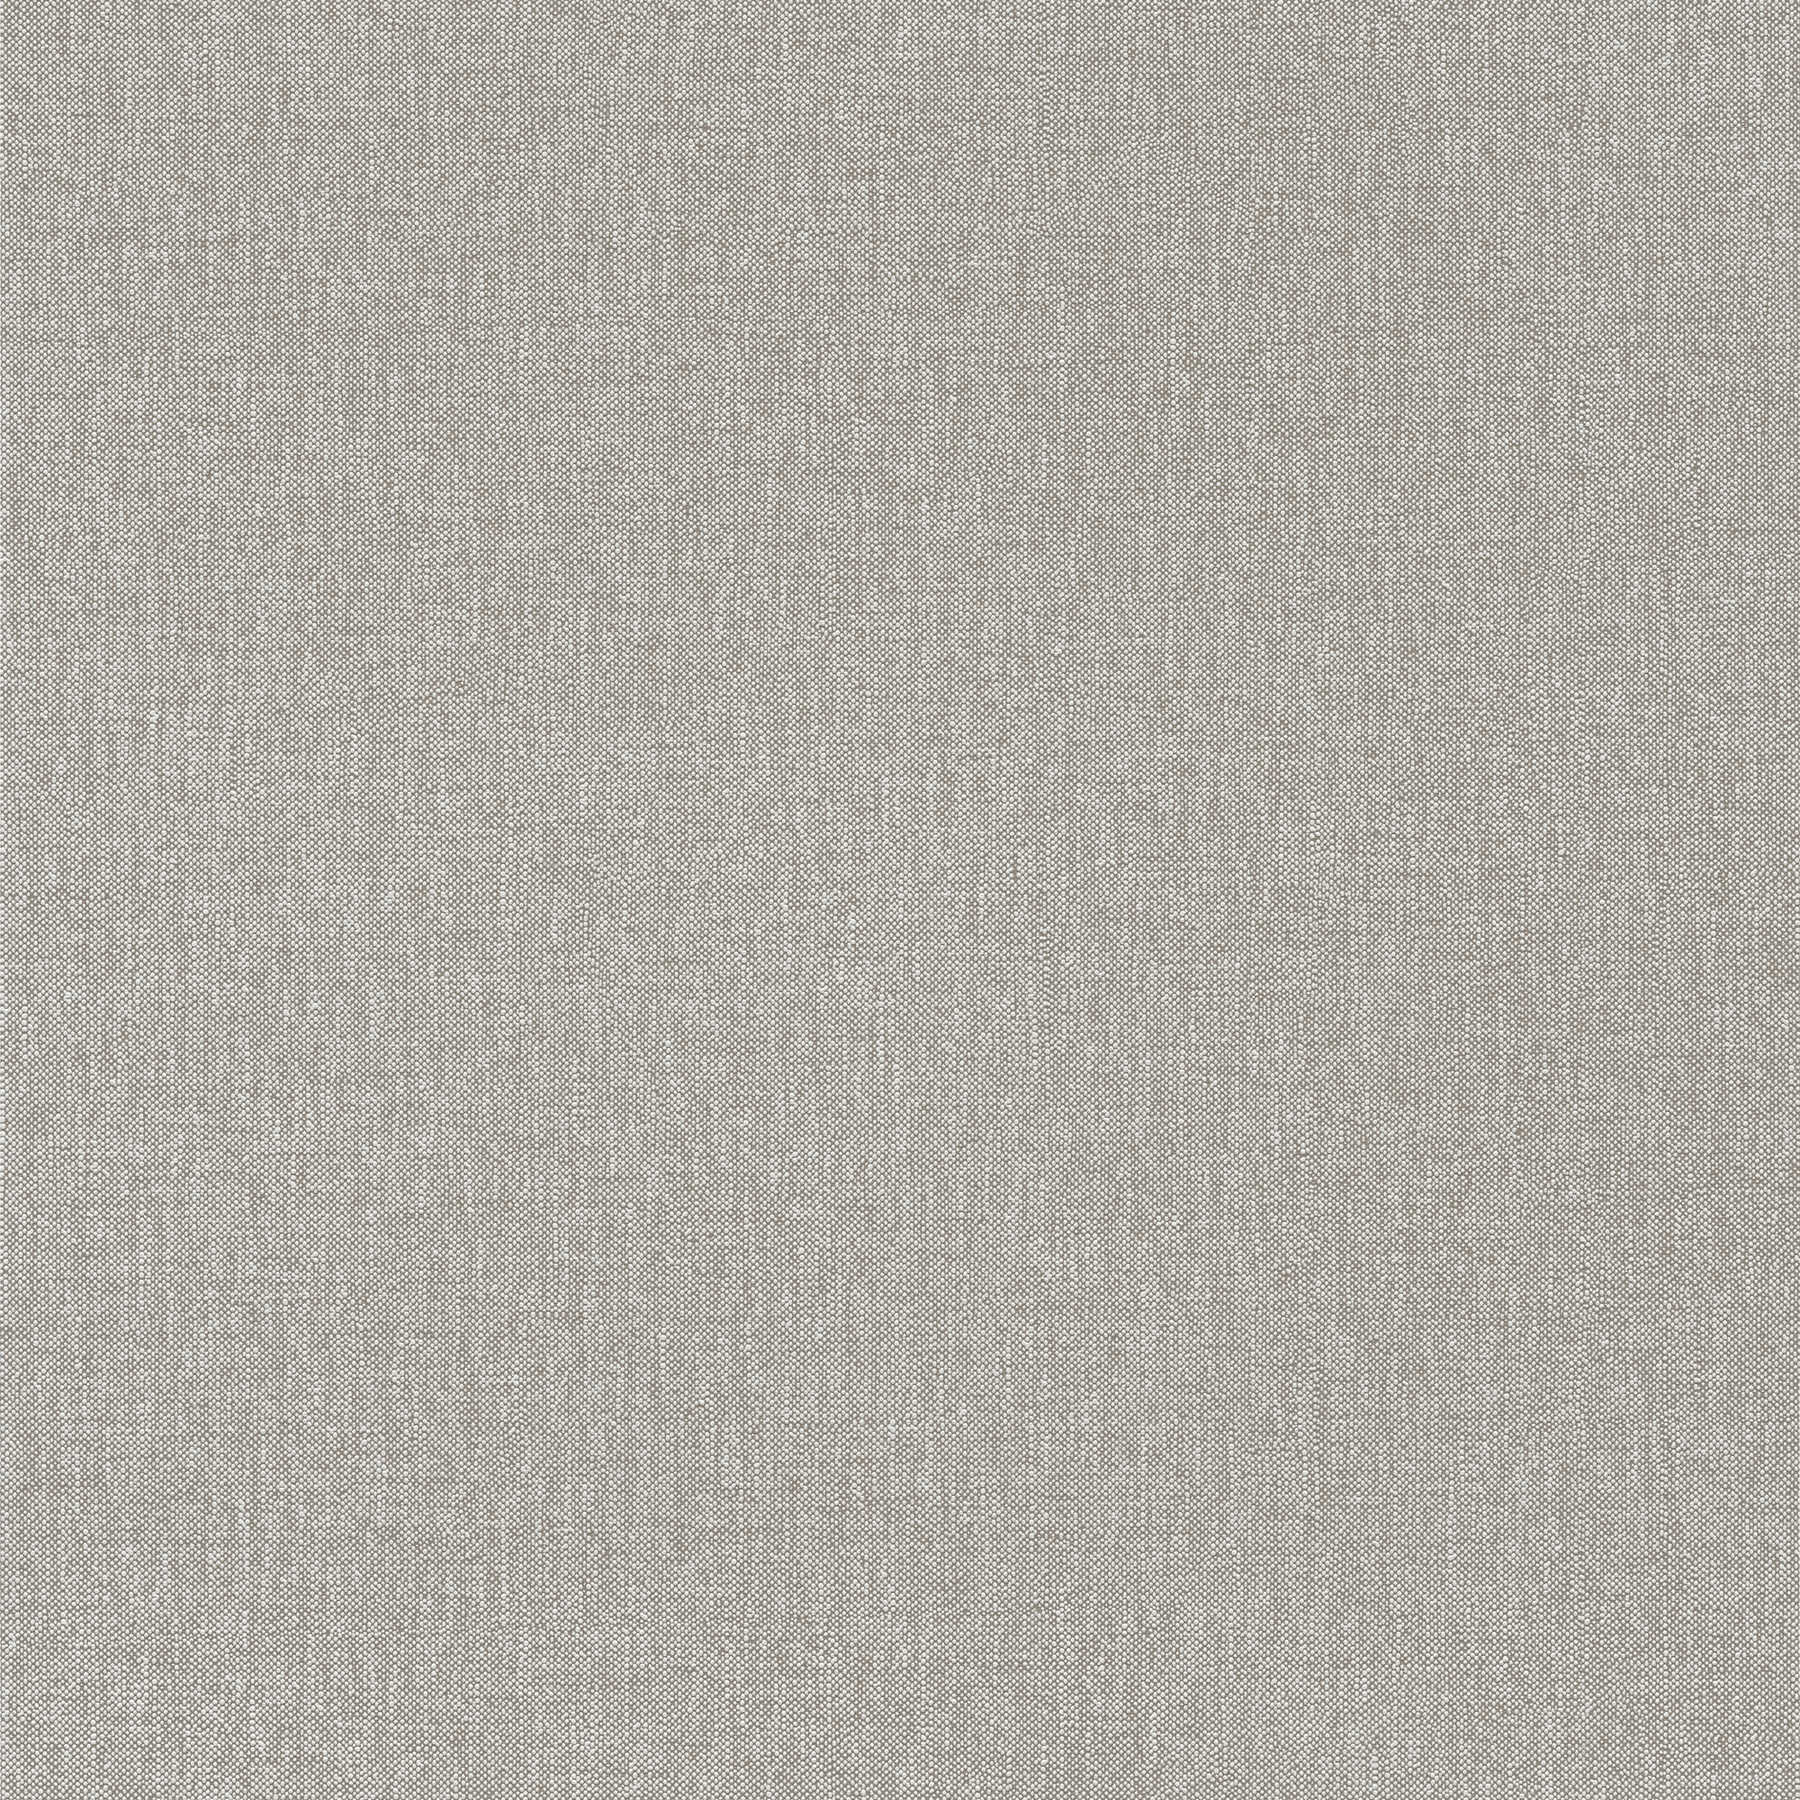 Textile look wallpaper, grey-brown fabric structure - brown, cream
